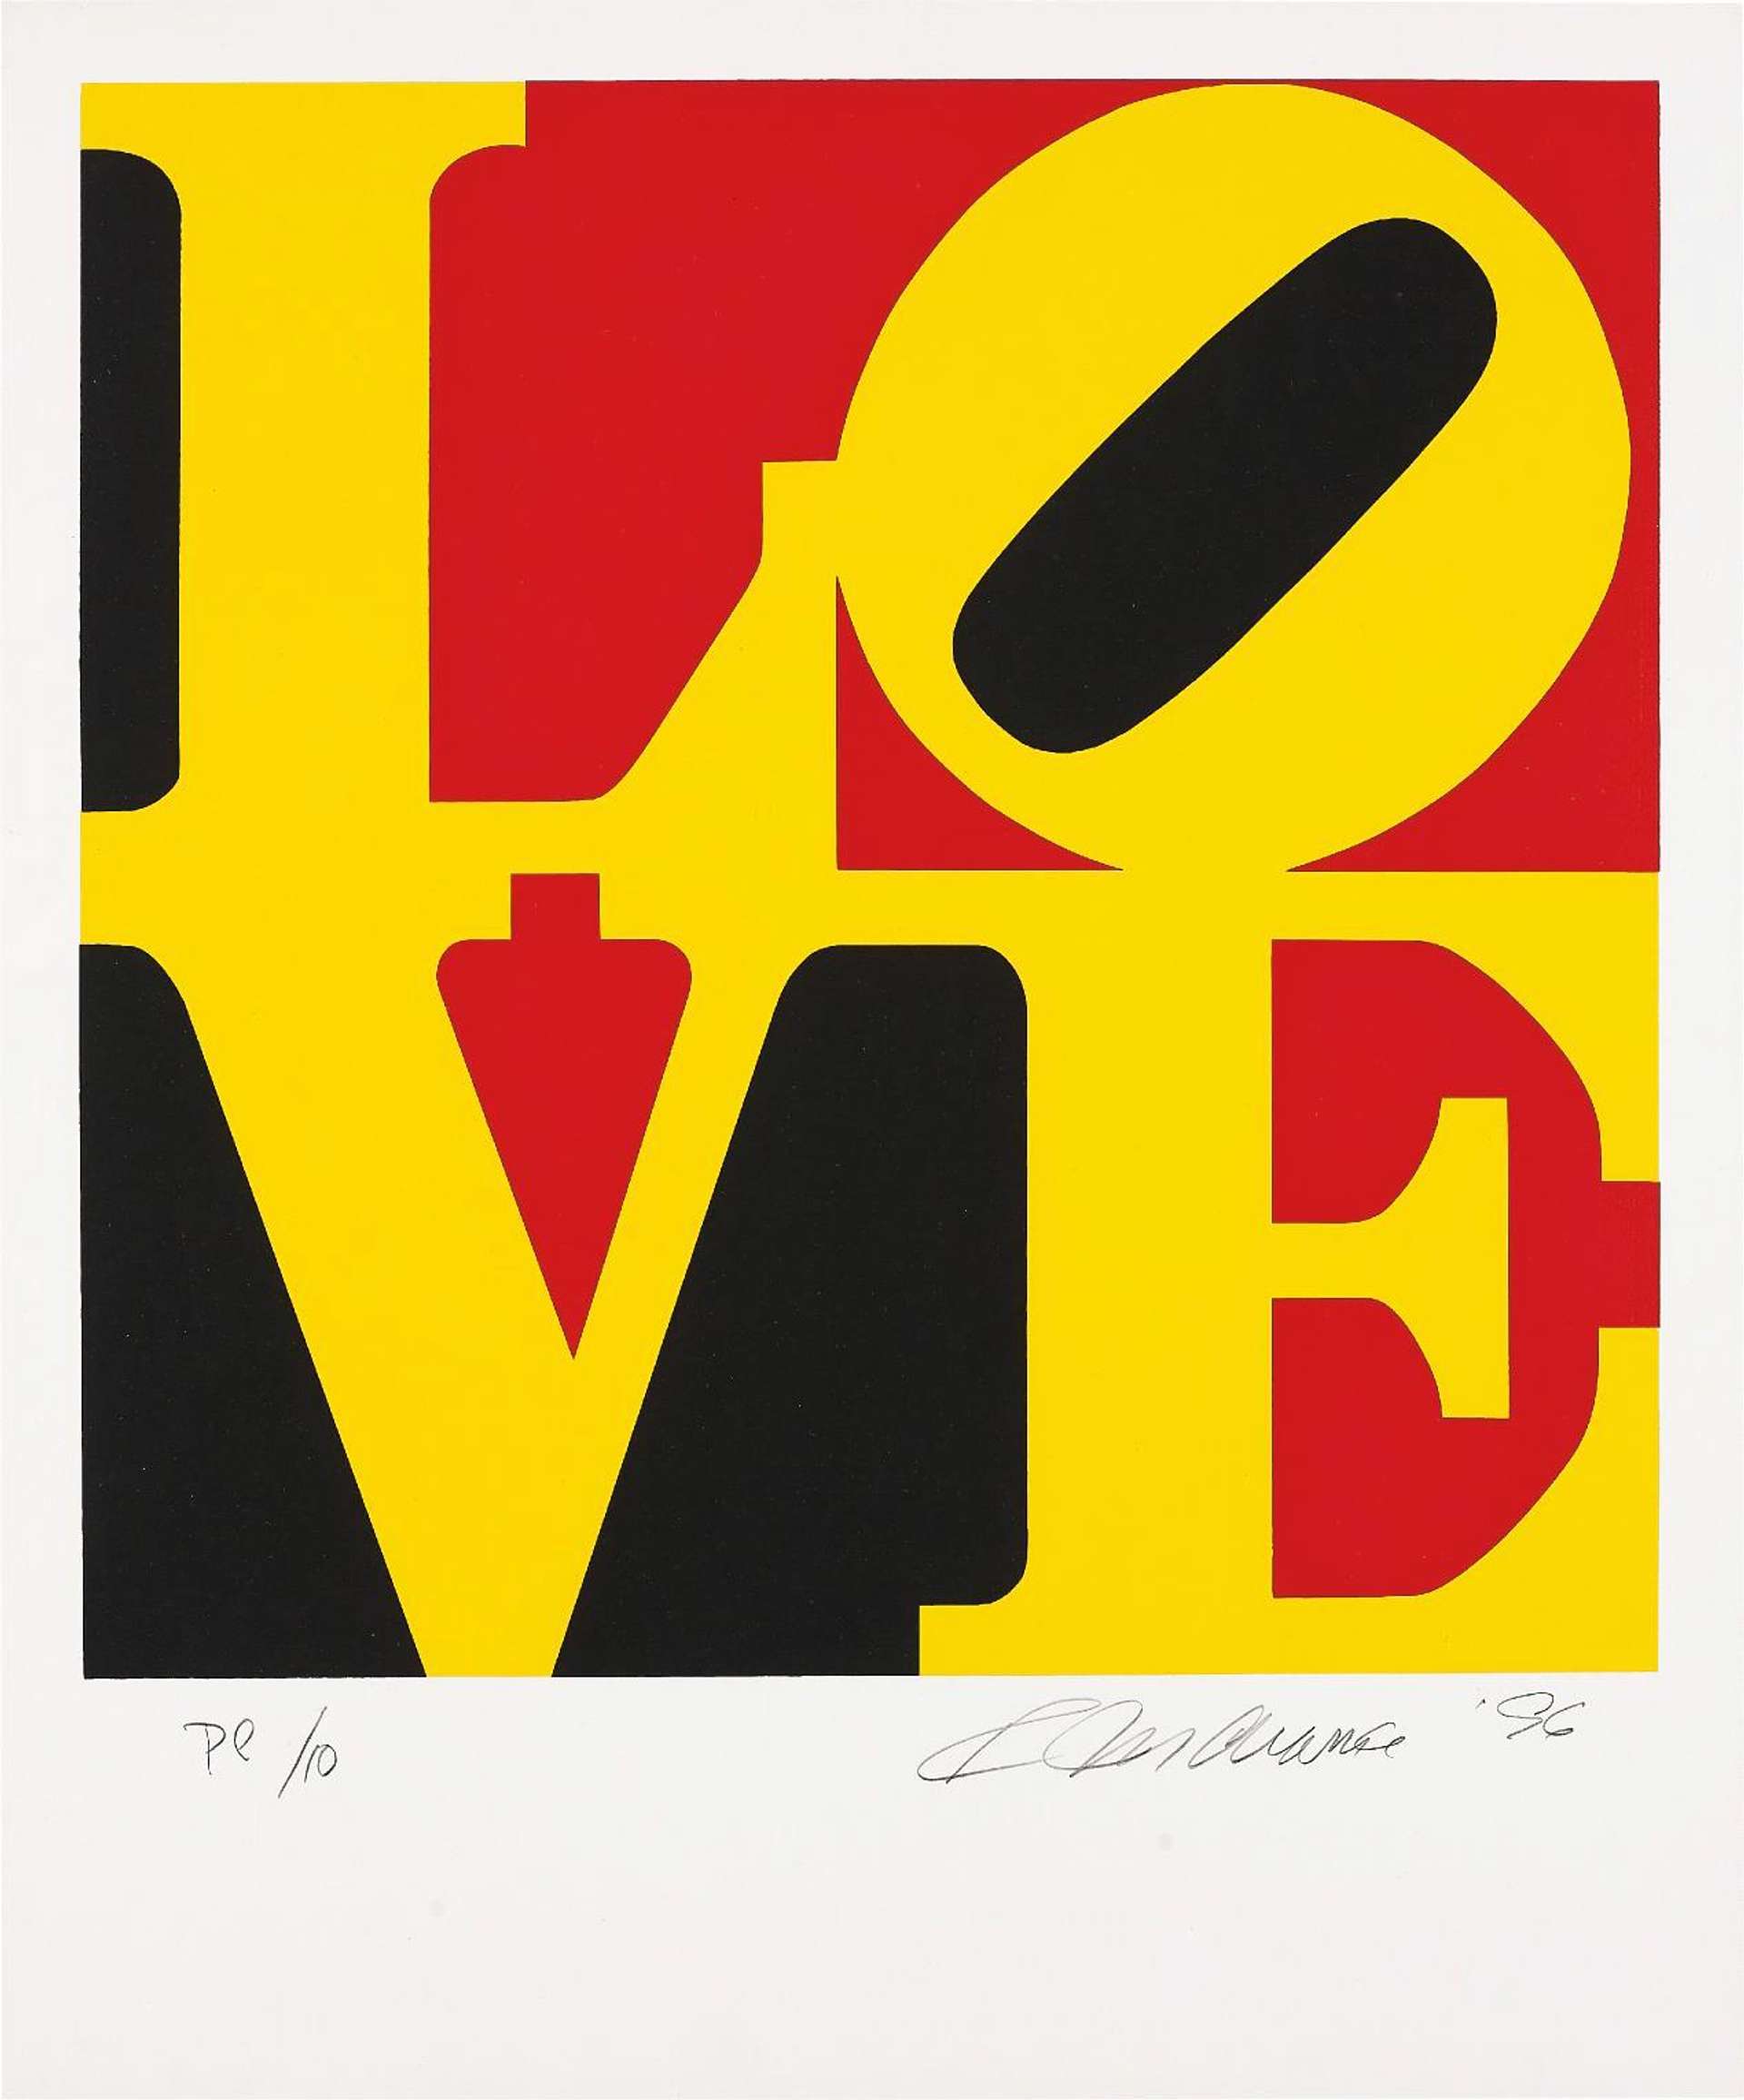 Robert Indiana: The Book Of Love (yellow, black and red) - Signed Print